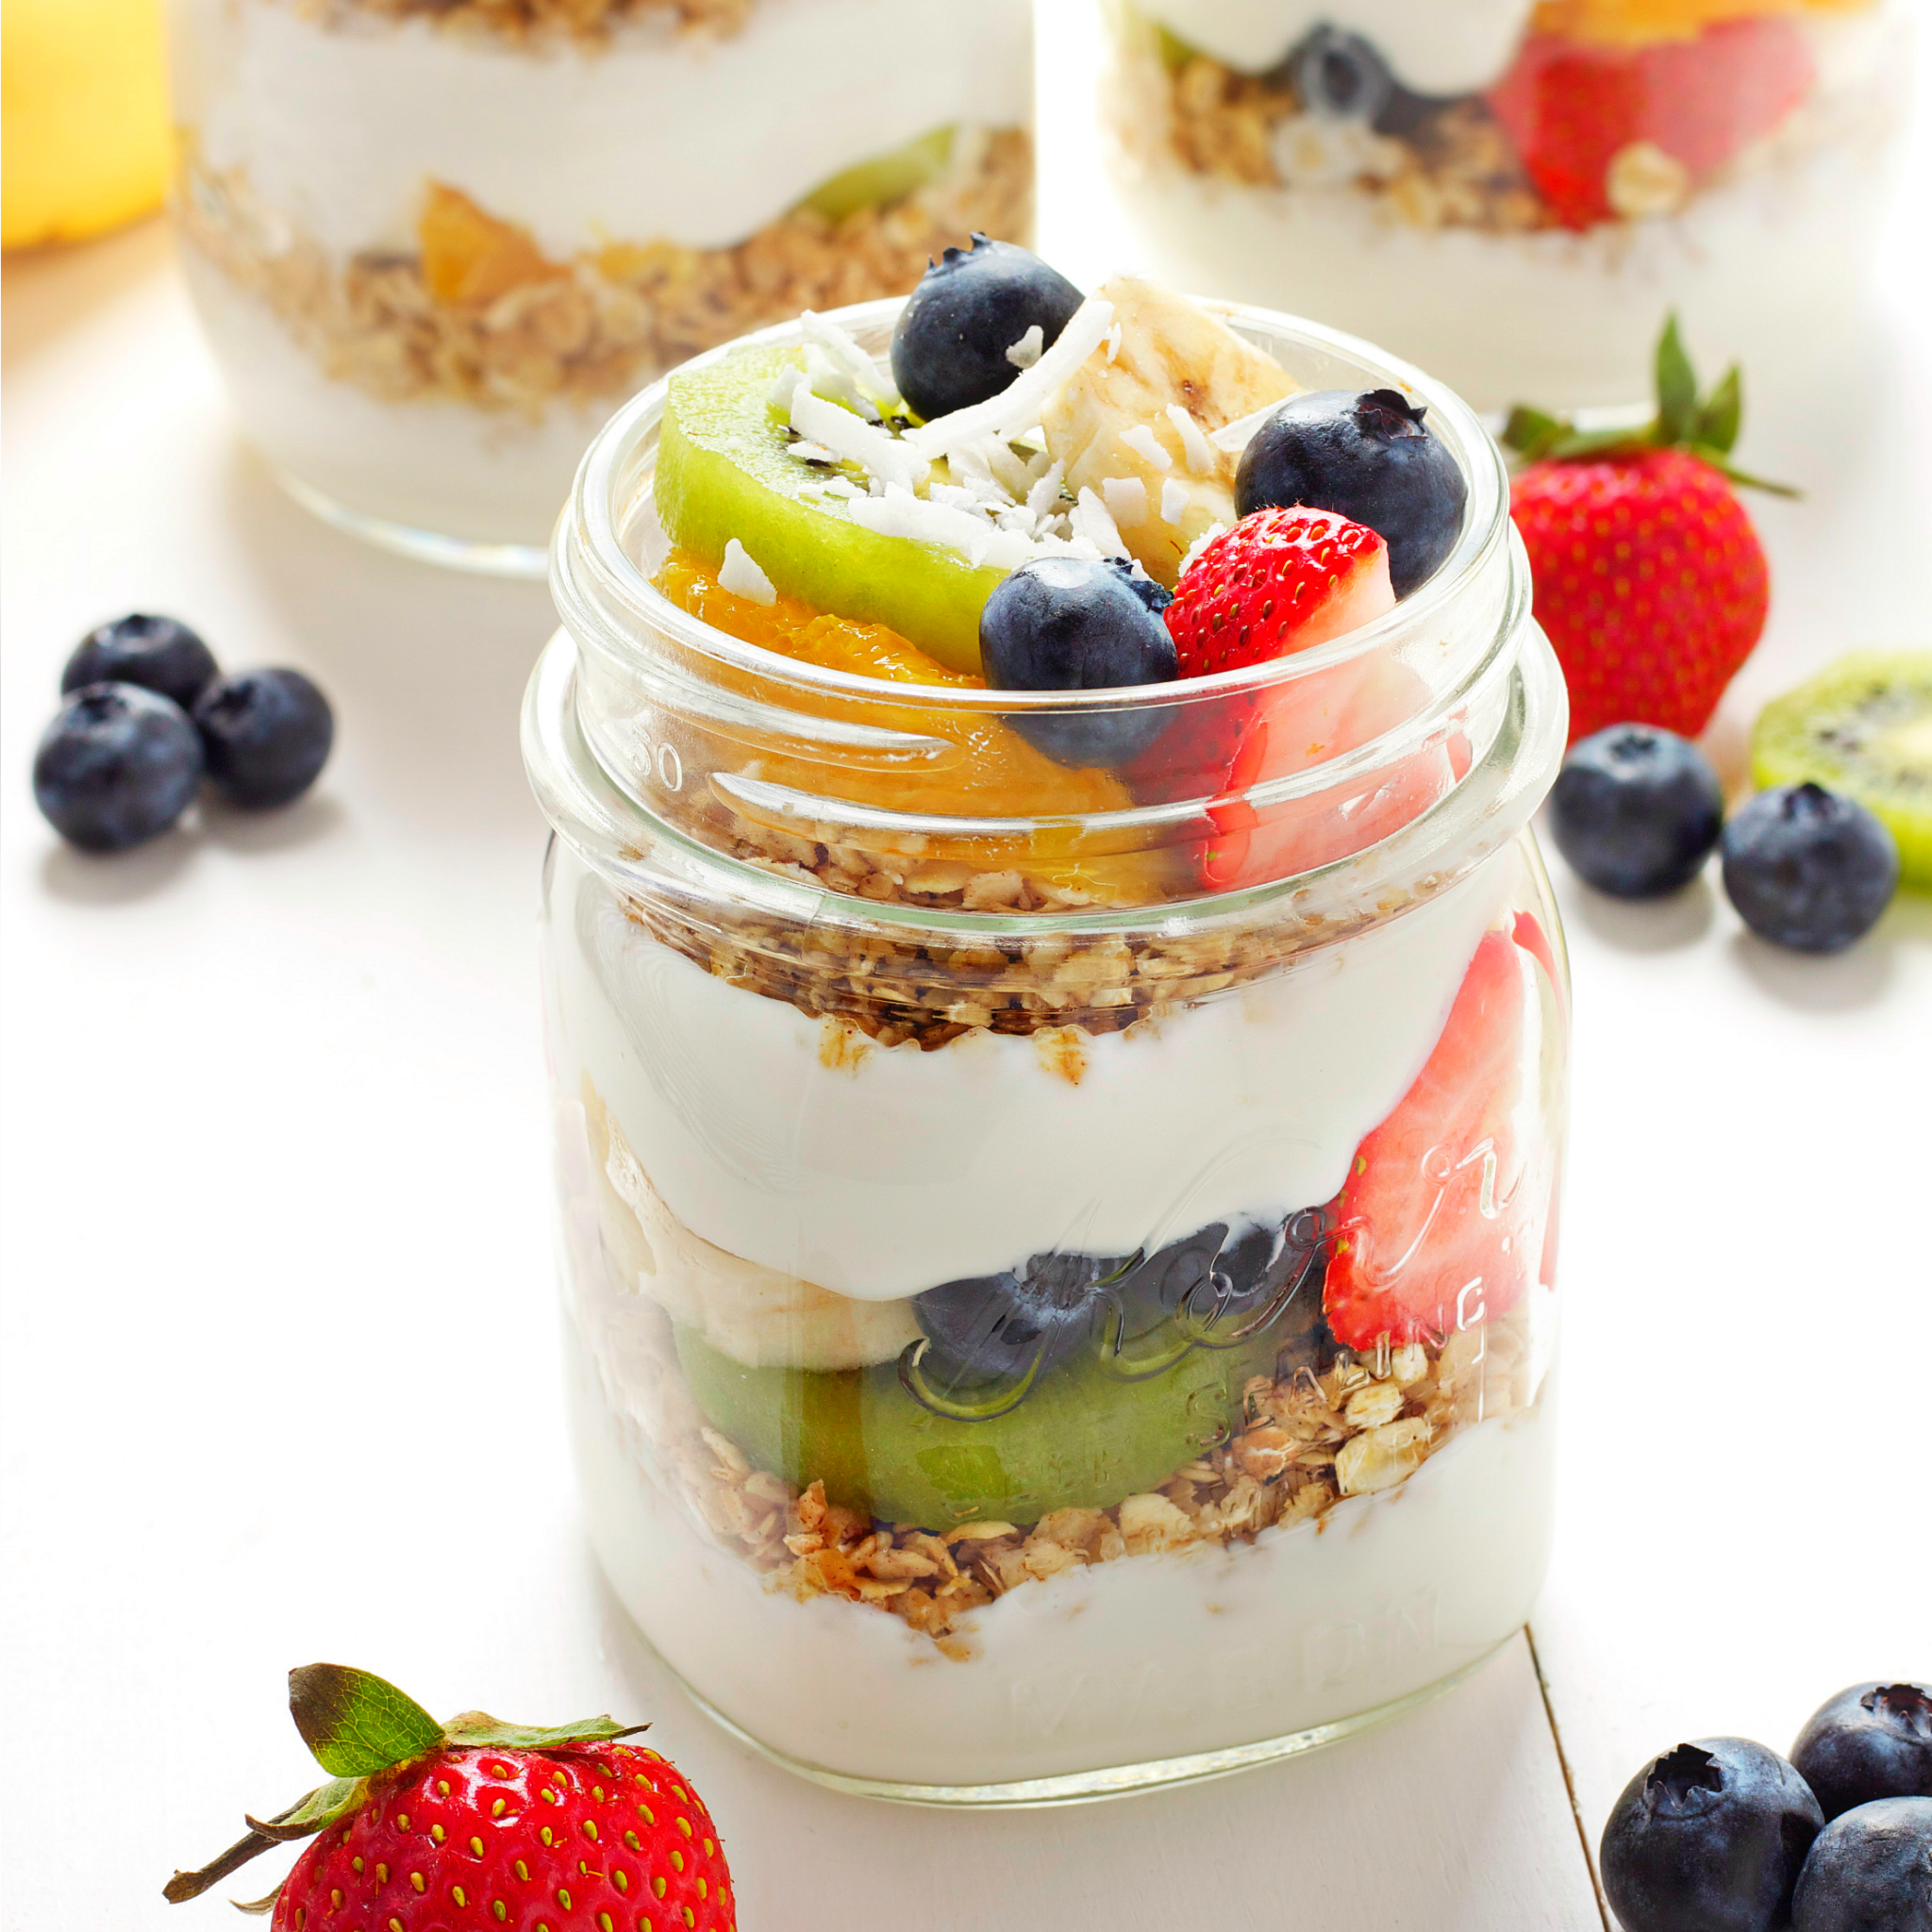 Tropical Fruit Breakfast Parfaits - The Busy Baker